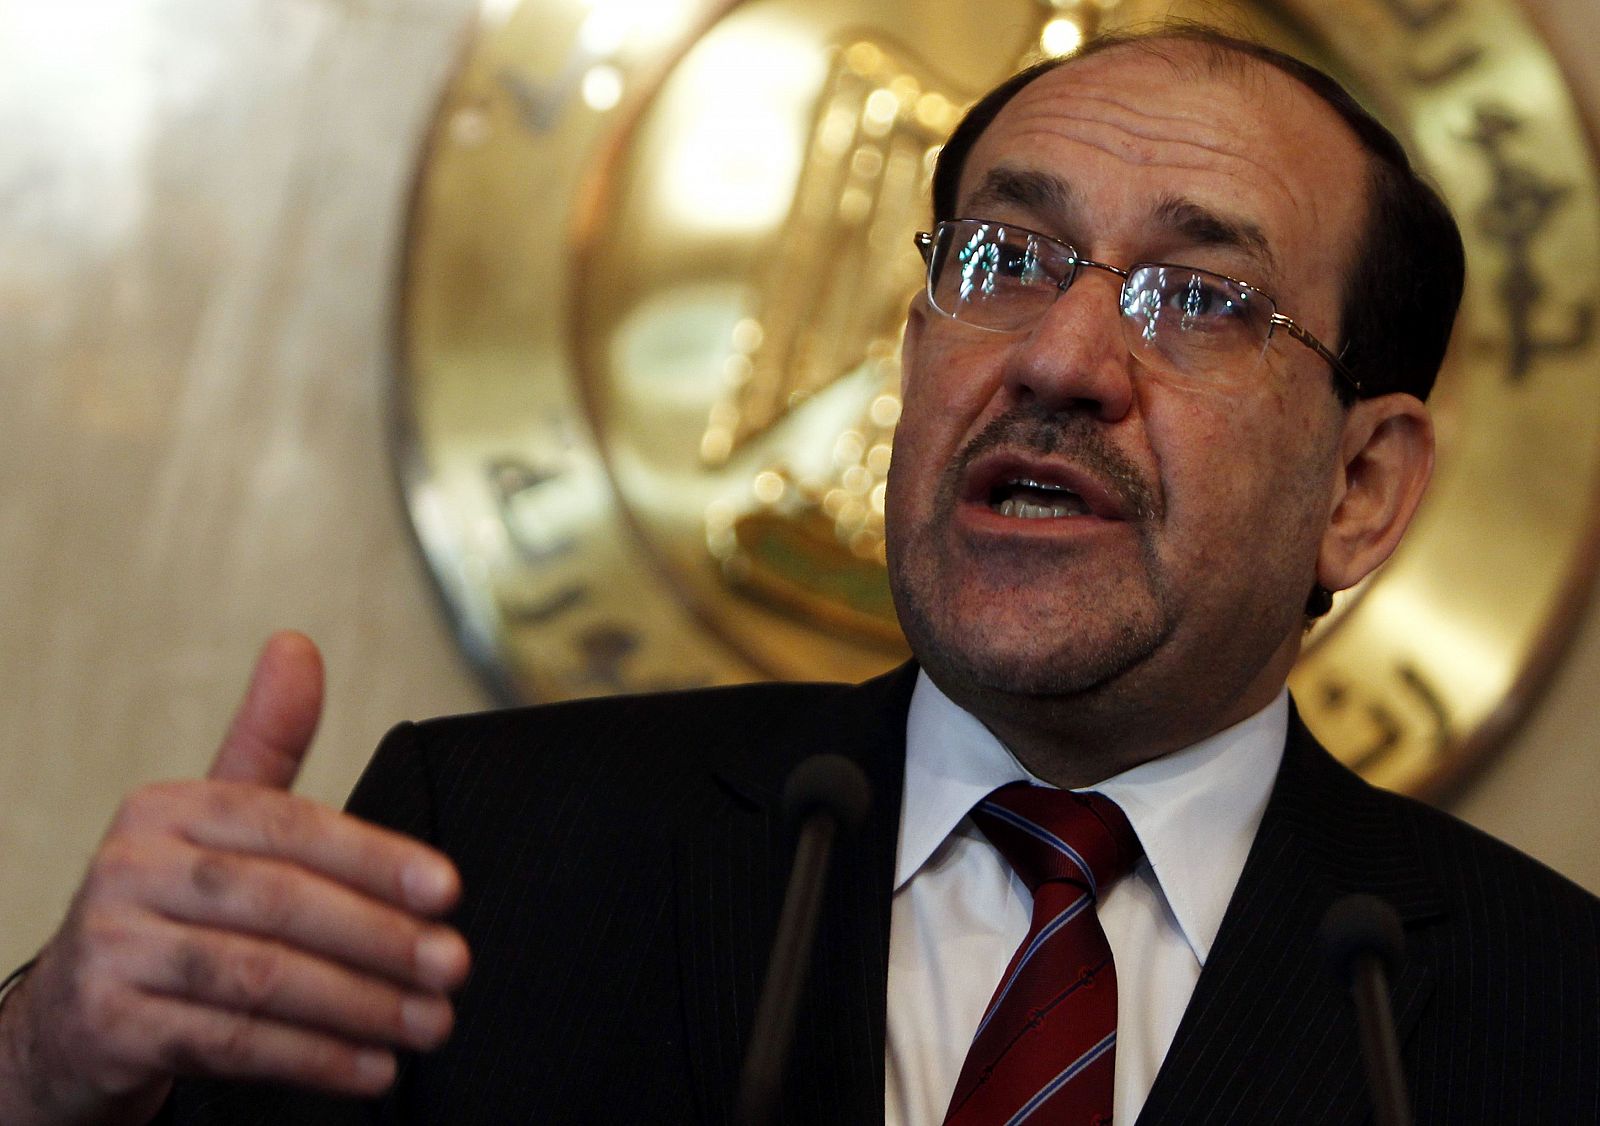 Iraq's PM Maliki speaks during a news conference after meeting Egypt's President Mubarak at the presidential palace in Cairo